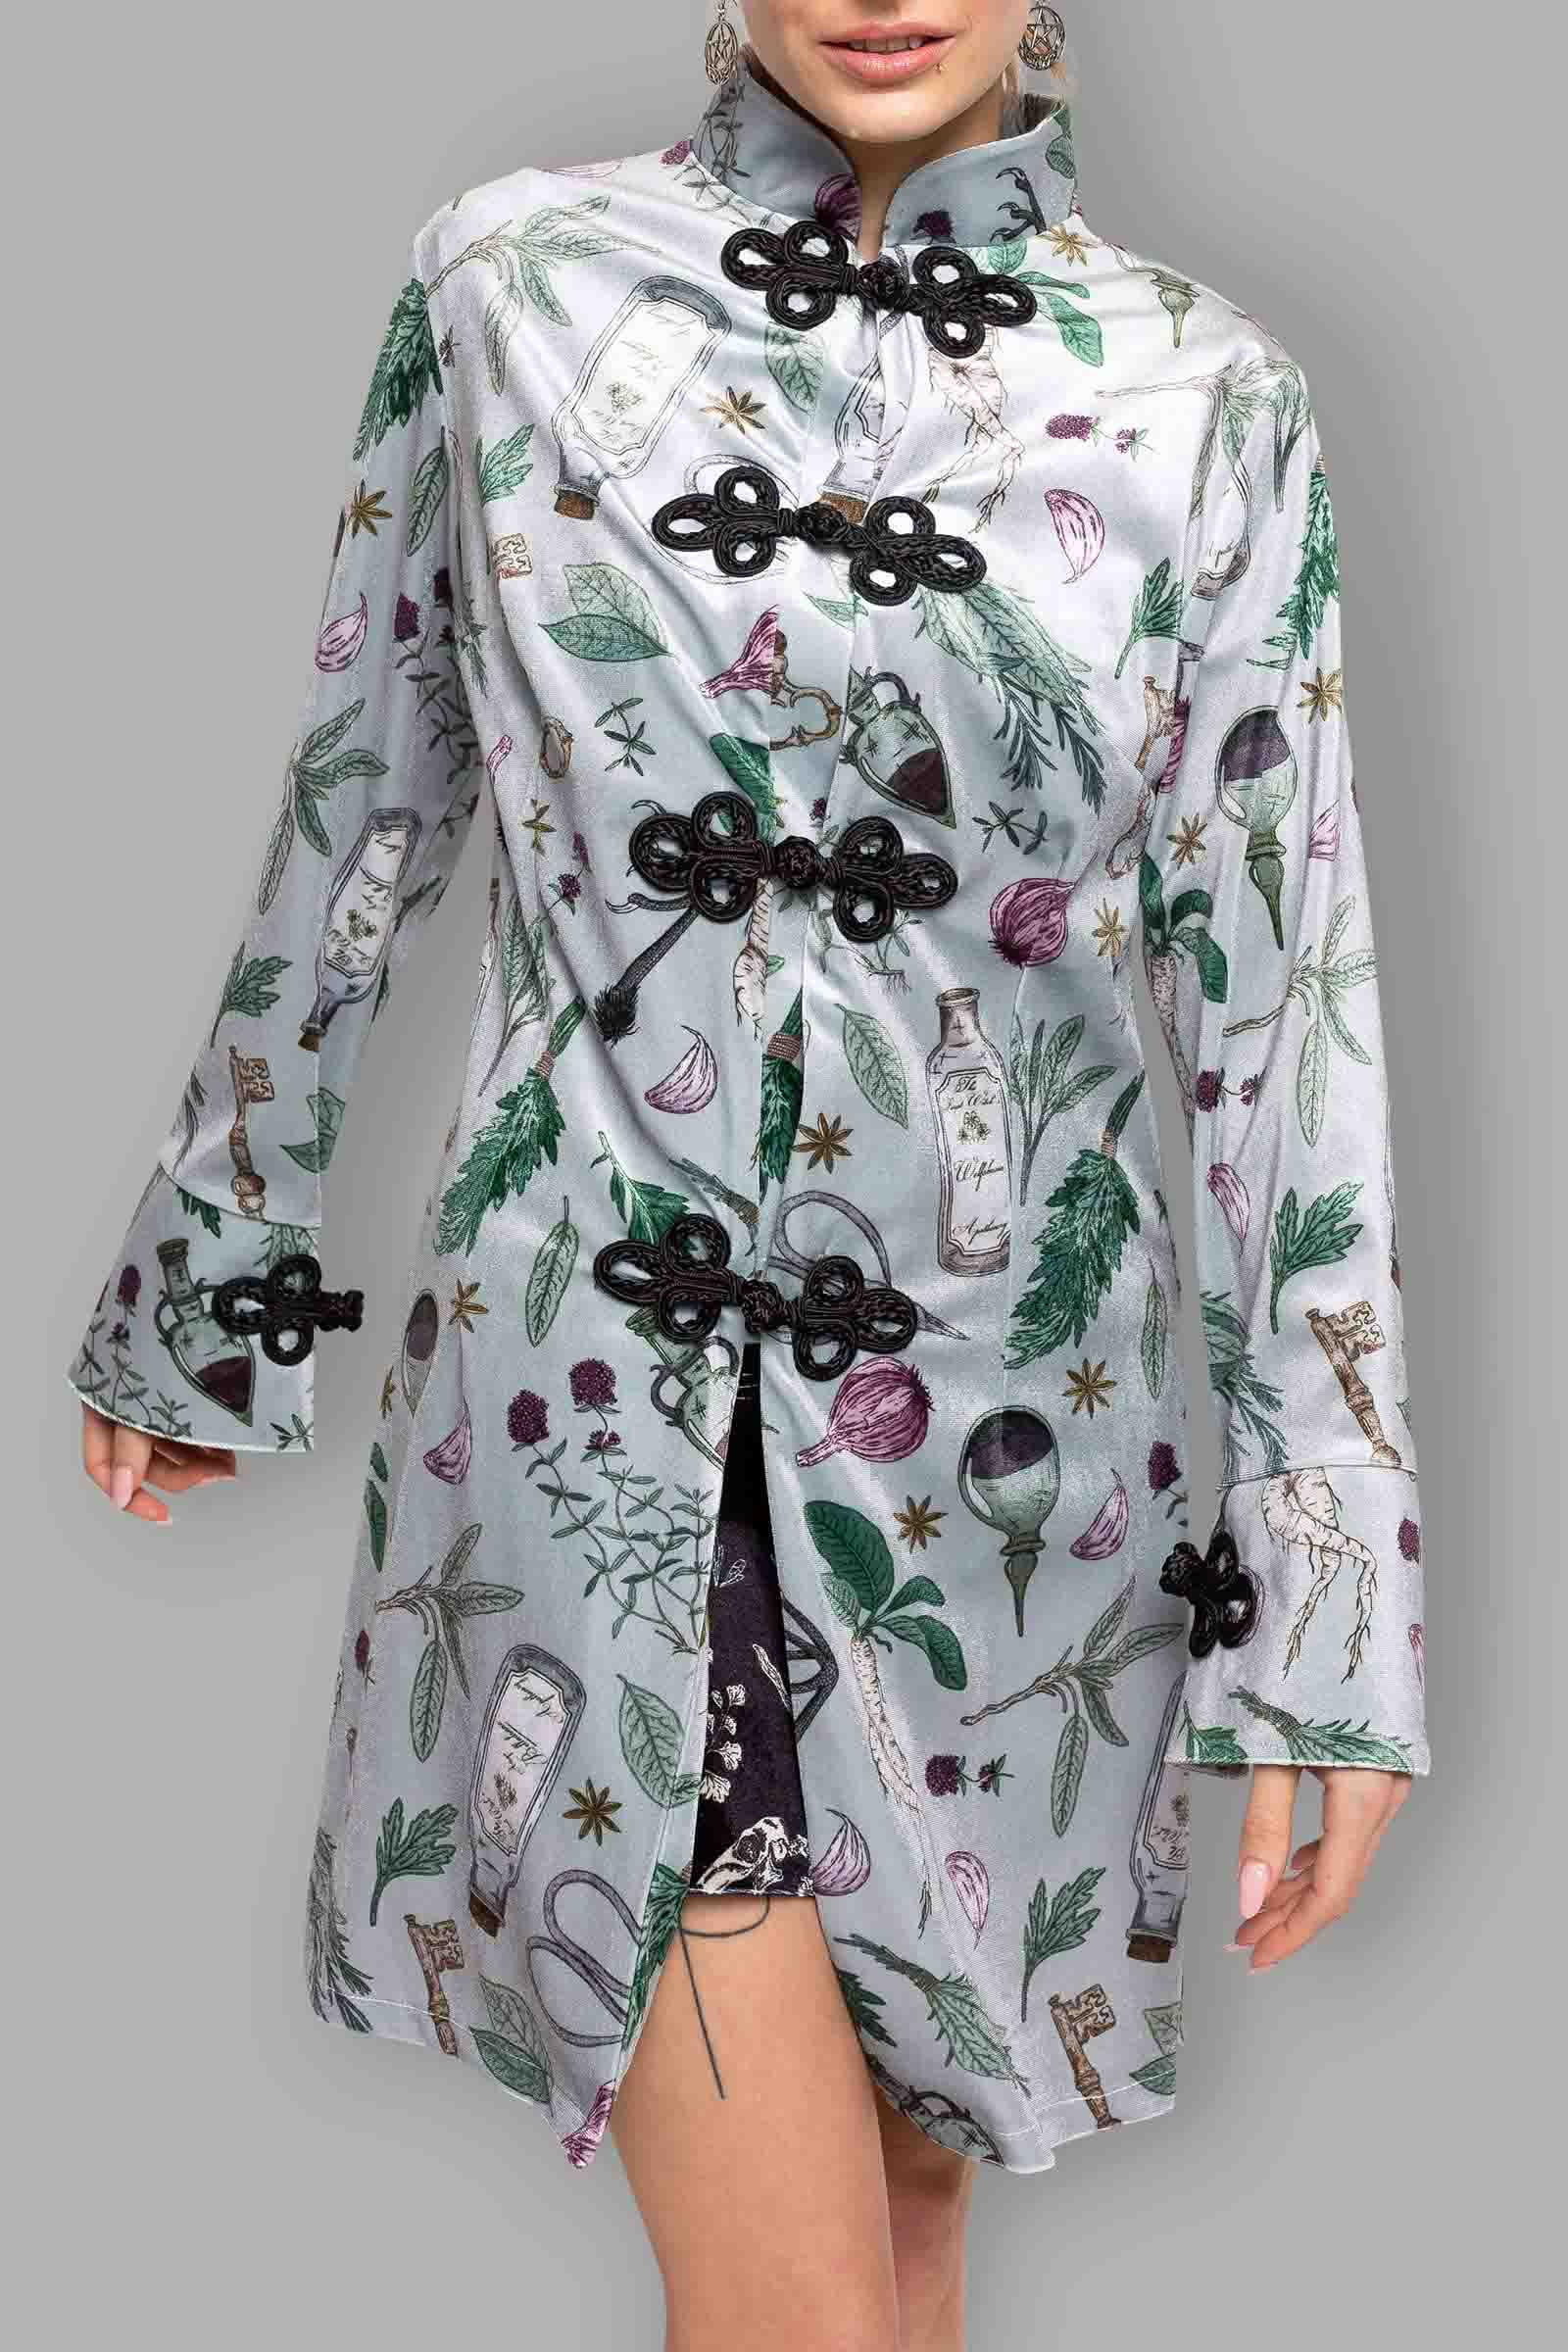 cosmic drifters frog clasp velvet jacket forest witch print close(1)